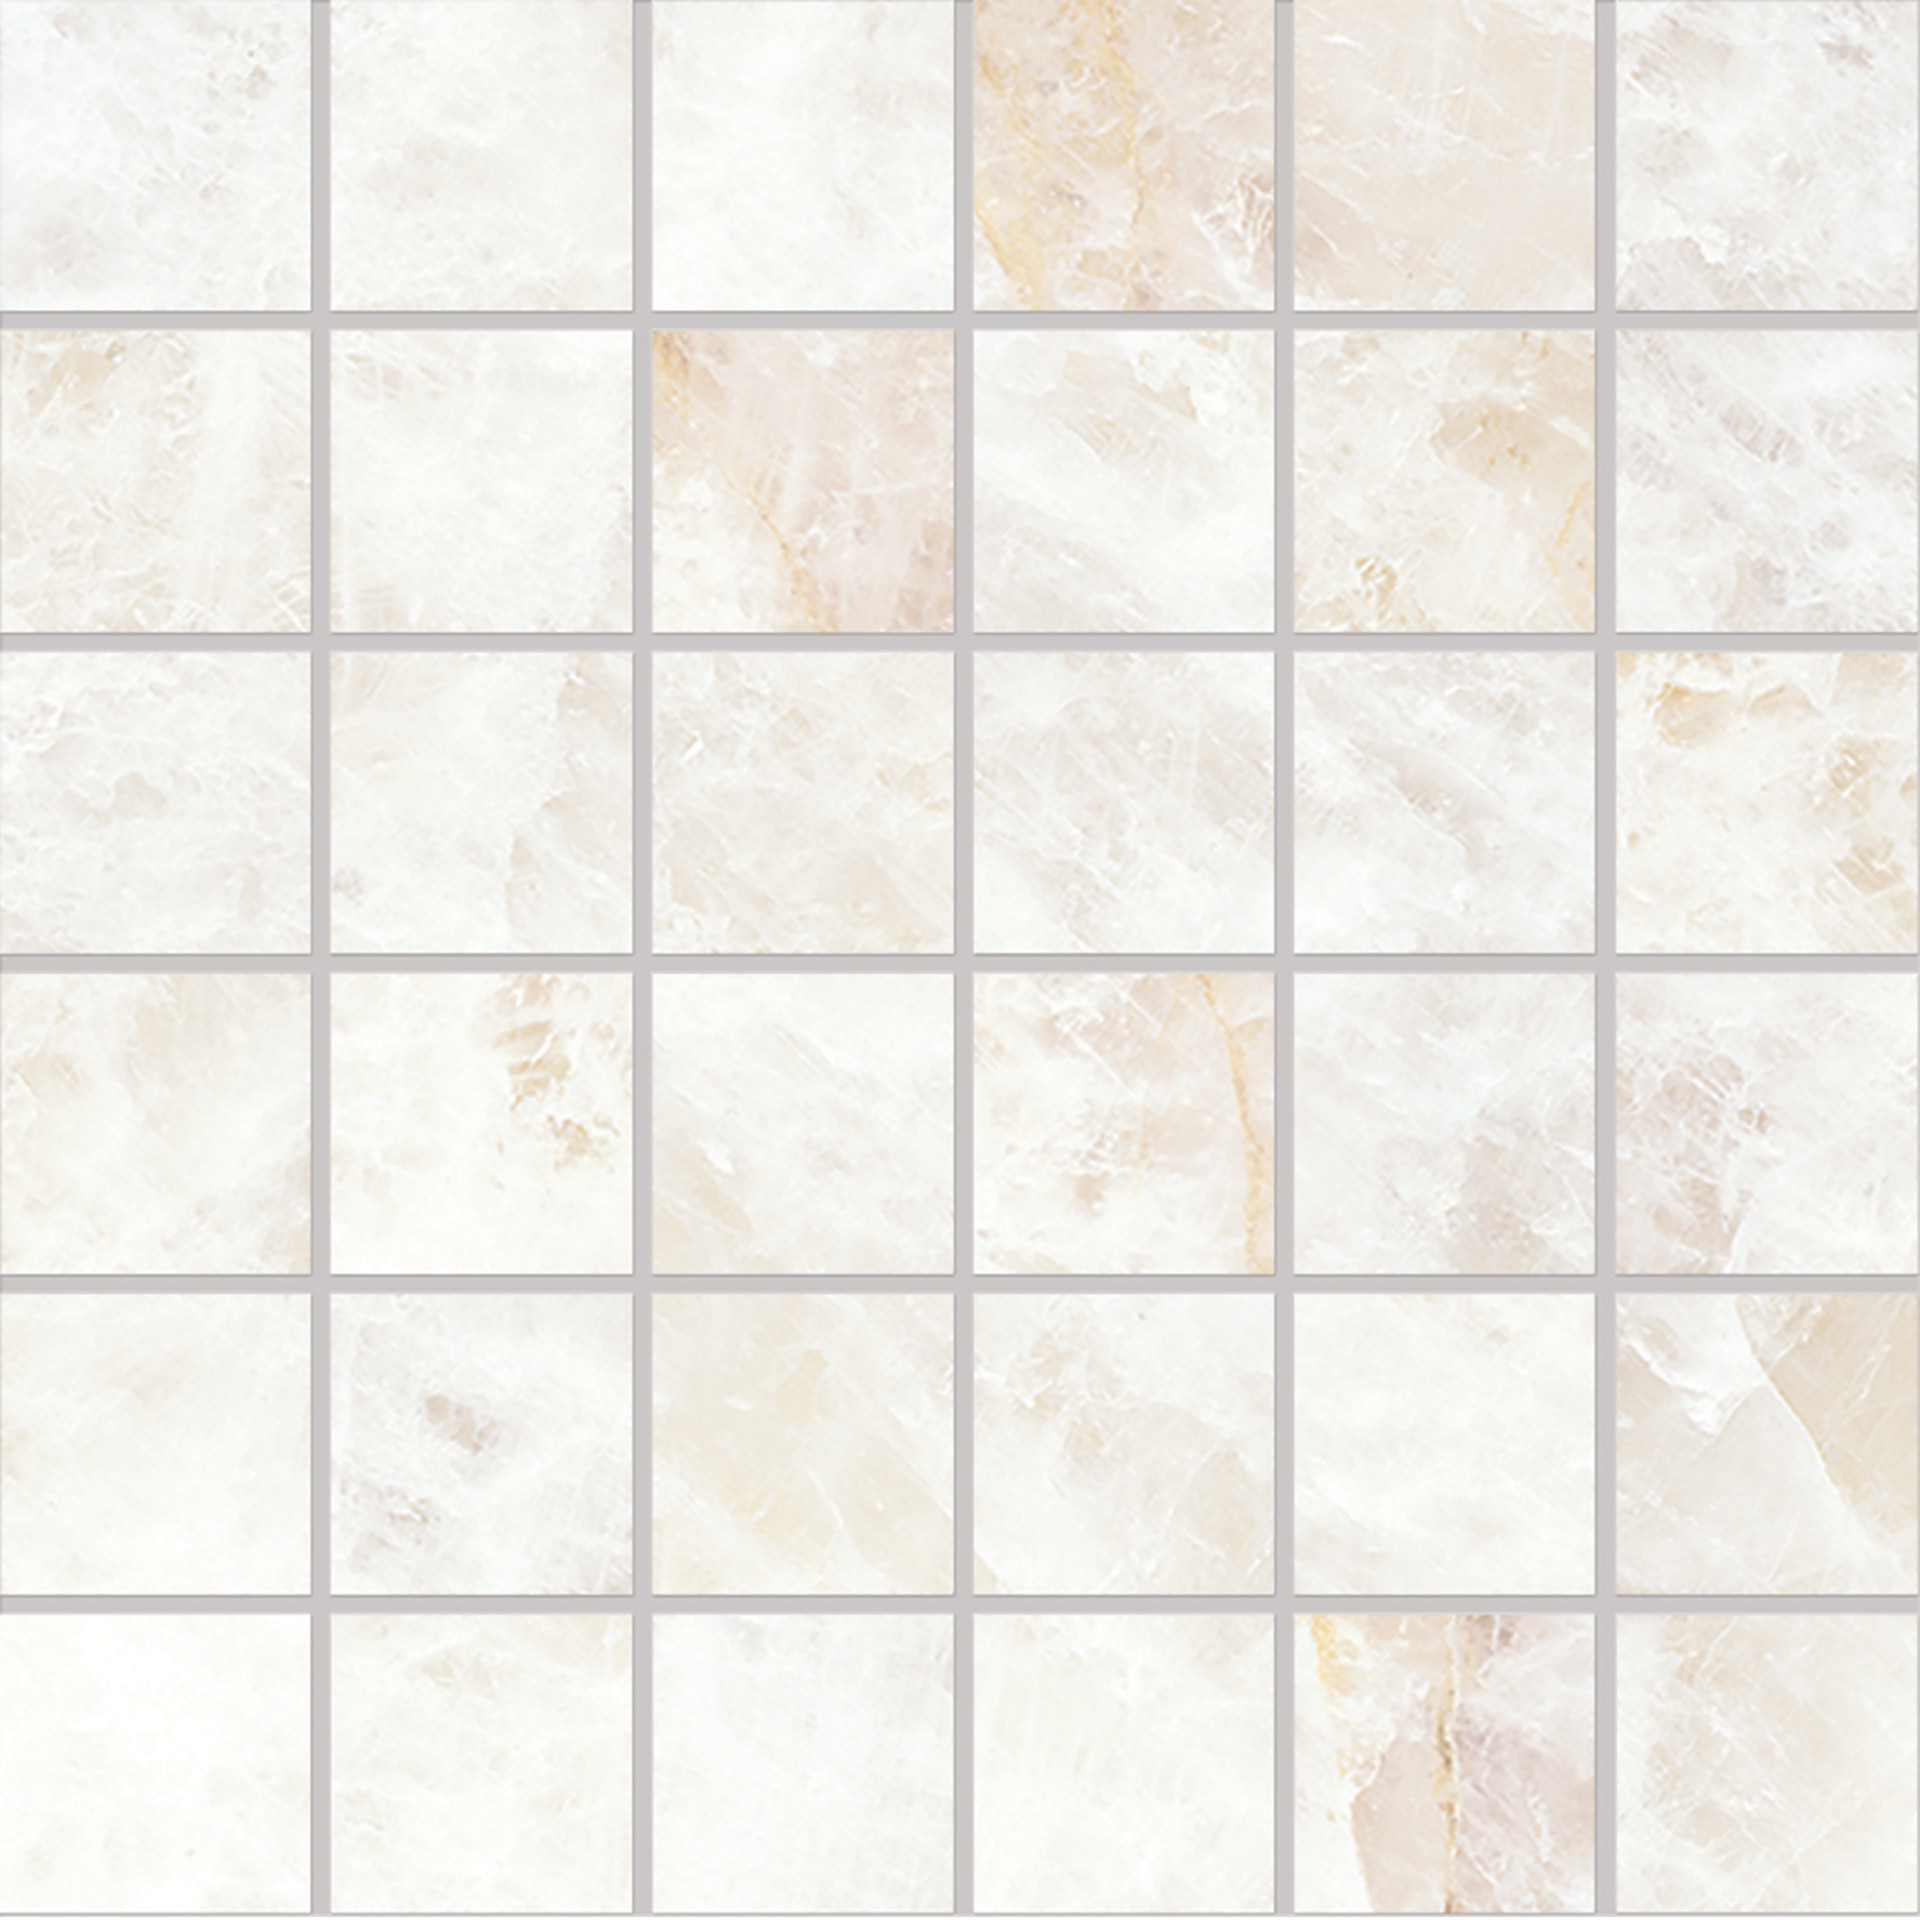 Precious Crystal White Marble Canvas Mosaic by Emilceramica
